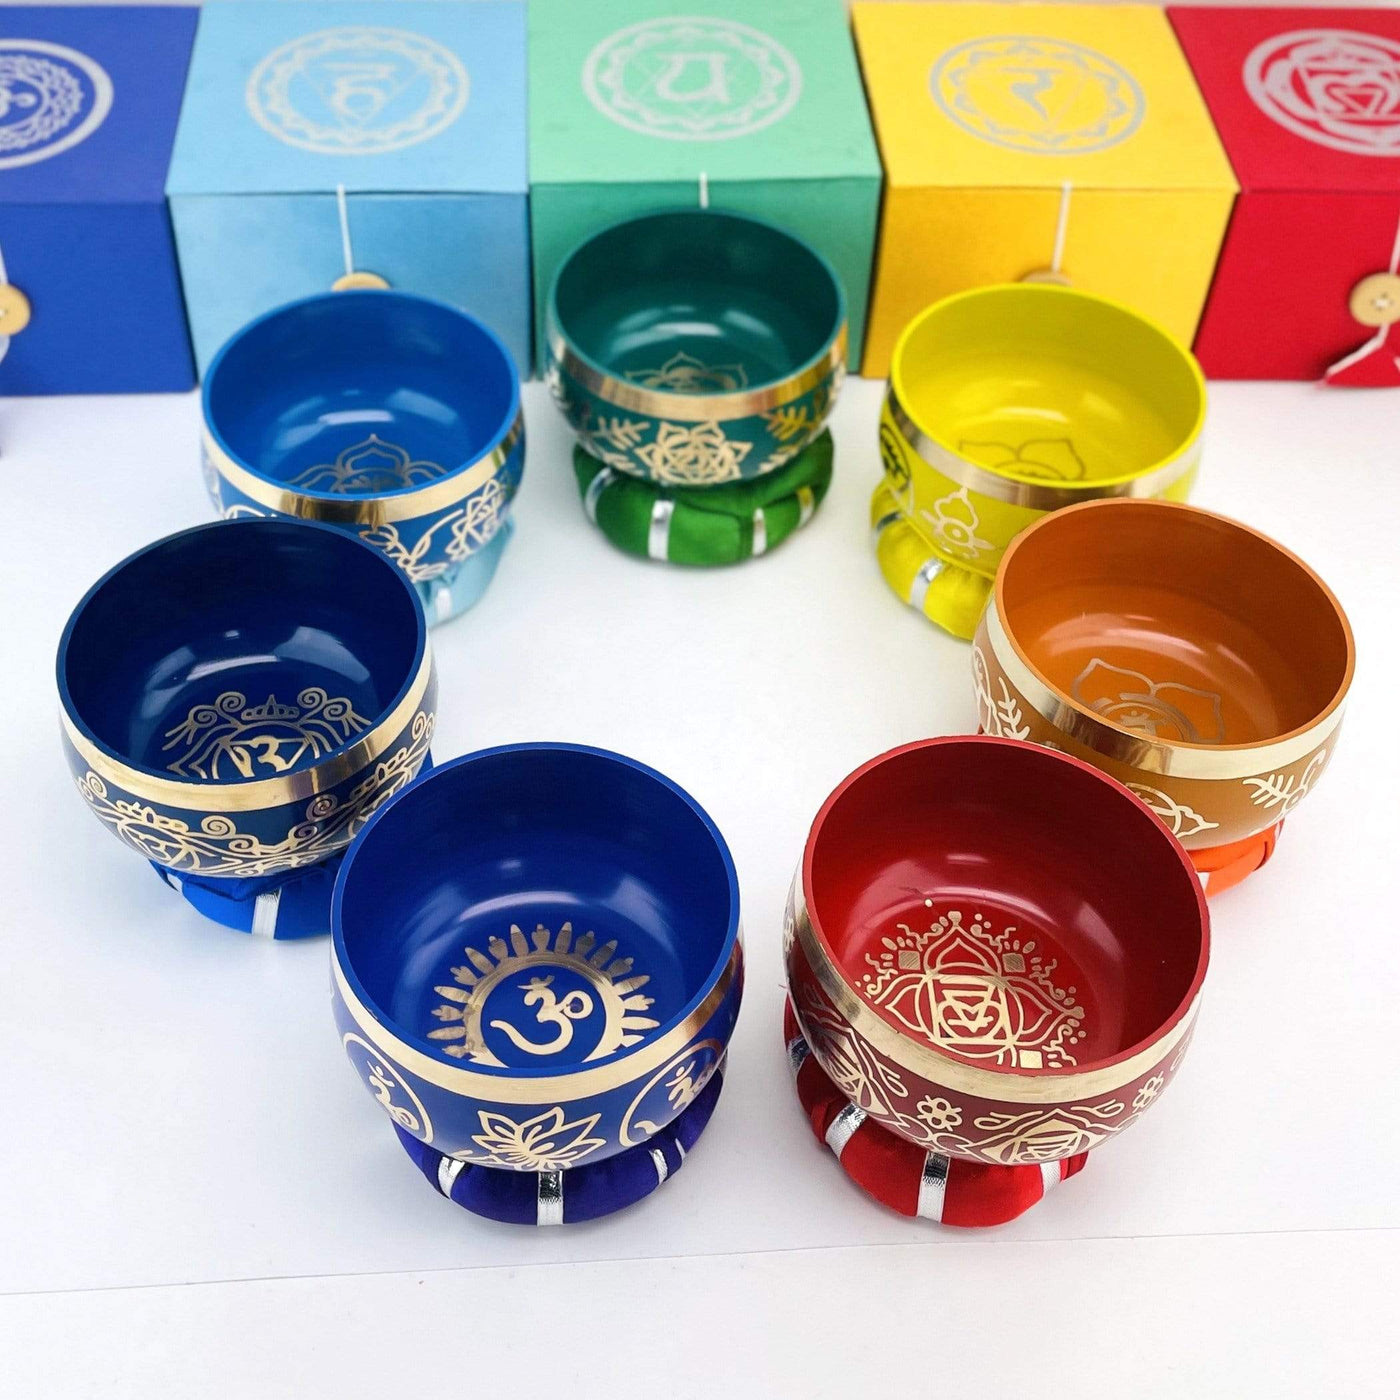 Brass Tibetan Chakra Singing Bowls in a circle showing all colors ontop of their pillows